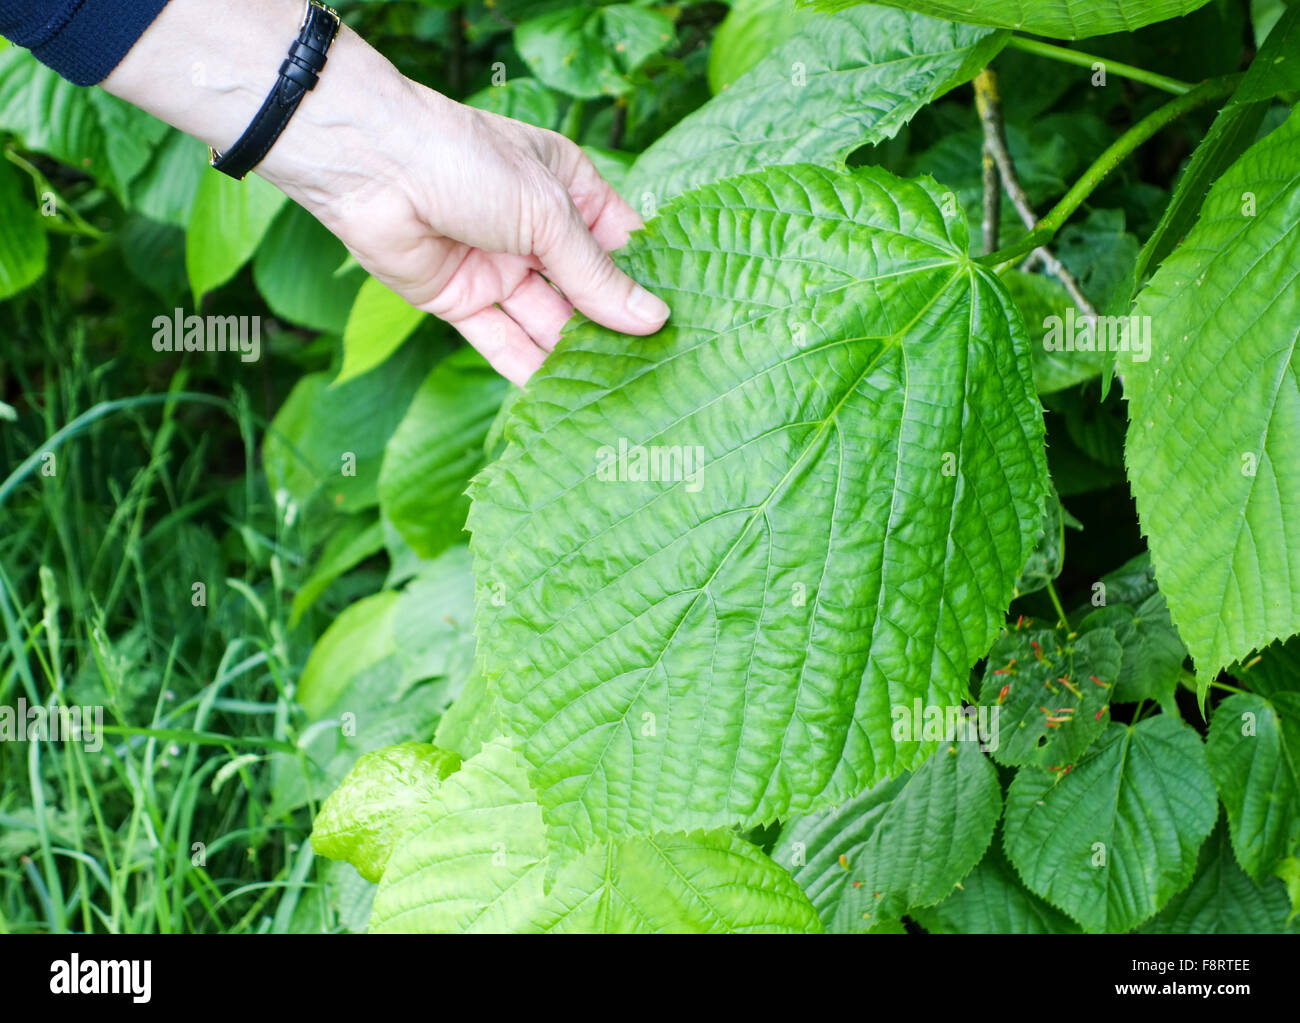 A woman's hand holding a very large leaf of a Large-leaved Lime (Tilia platyphyllos) tree Stock Photo